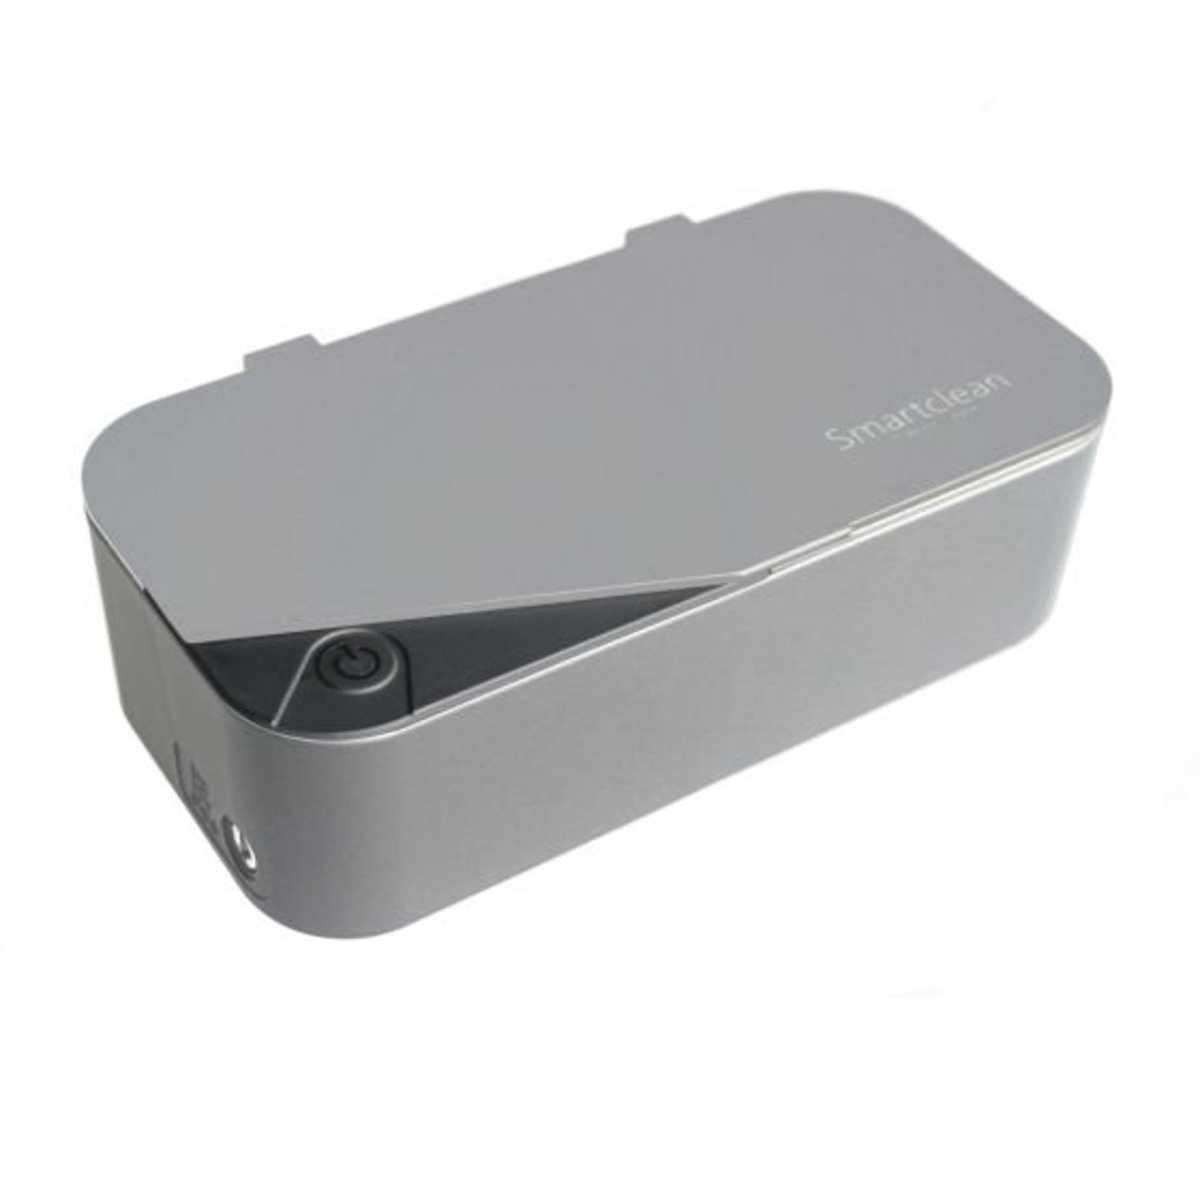 Smartclean - Ultrasonic Glasses Cleaner Vision.7 Upgraded Version - Silver [Licensed in Hong Kong]